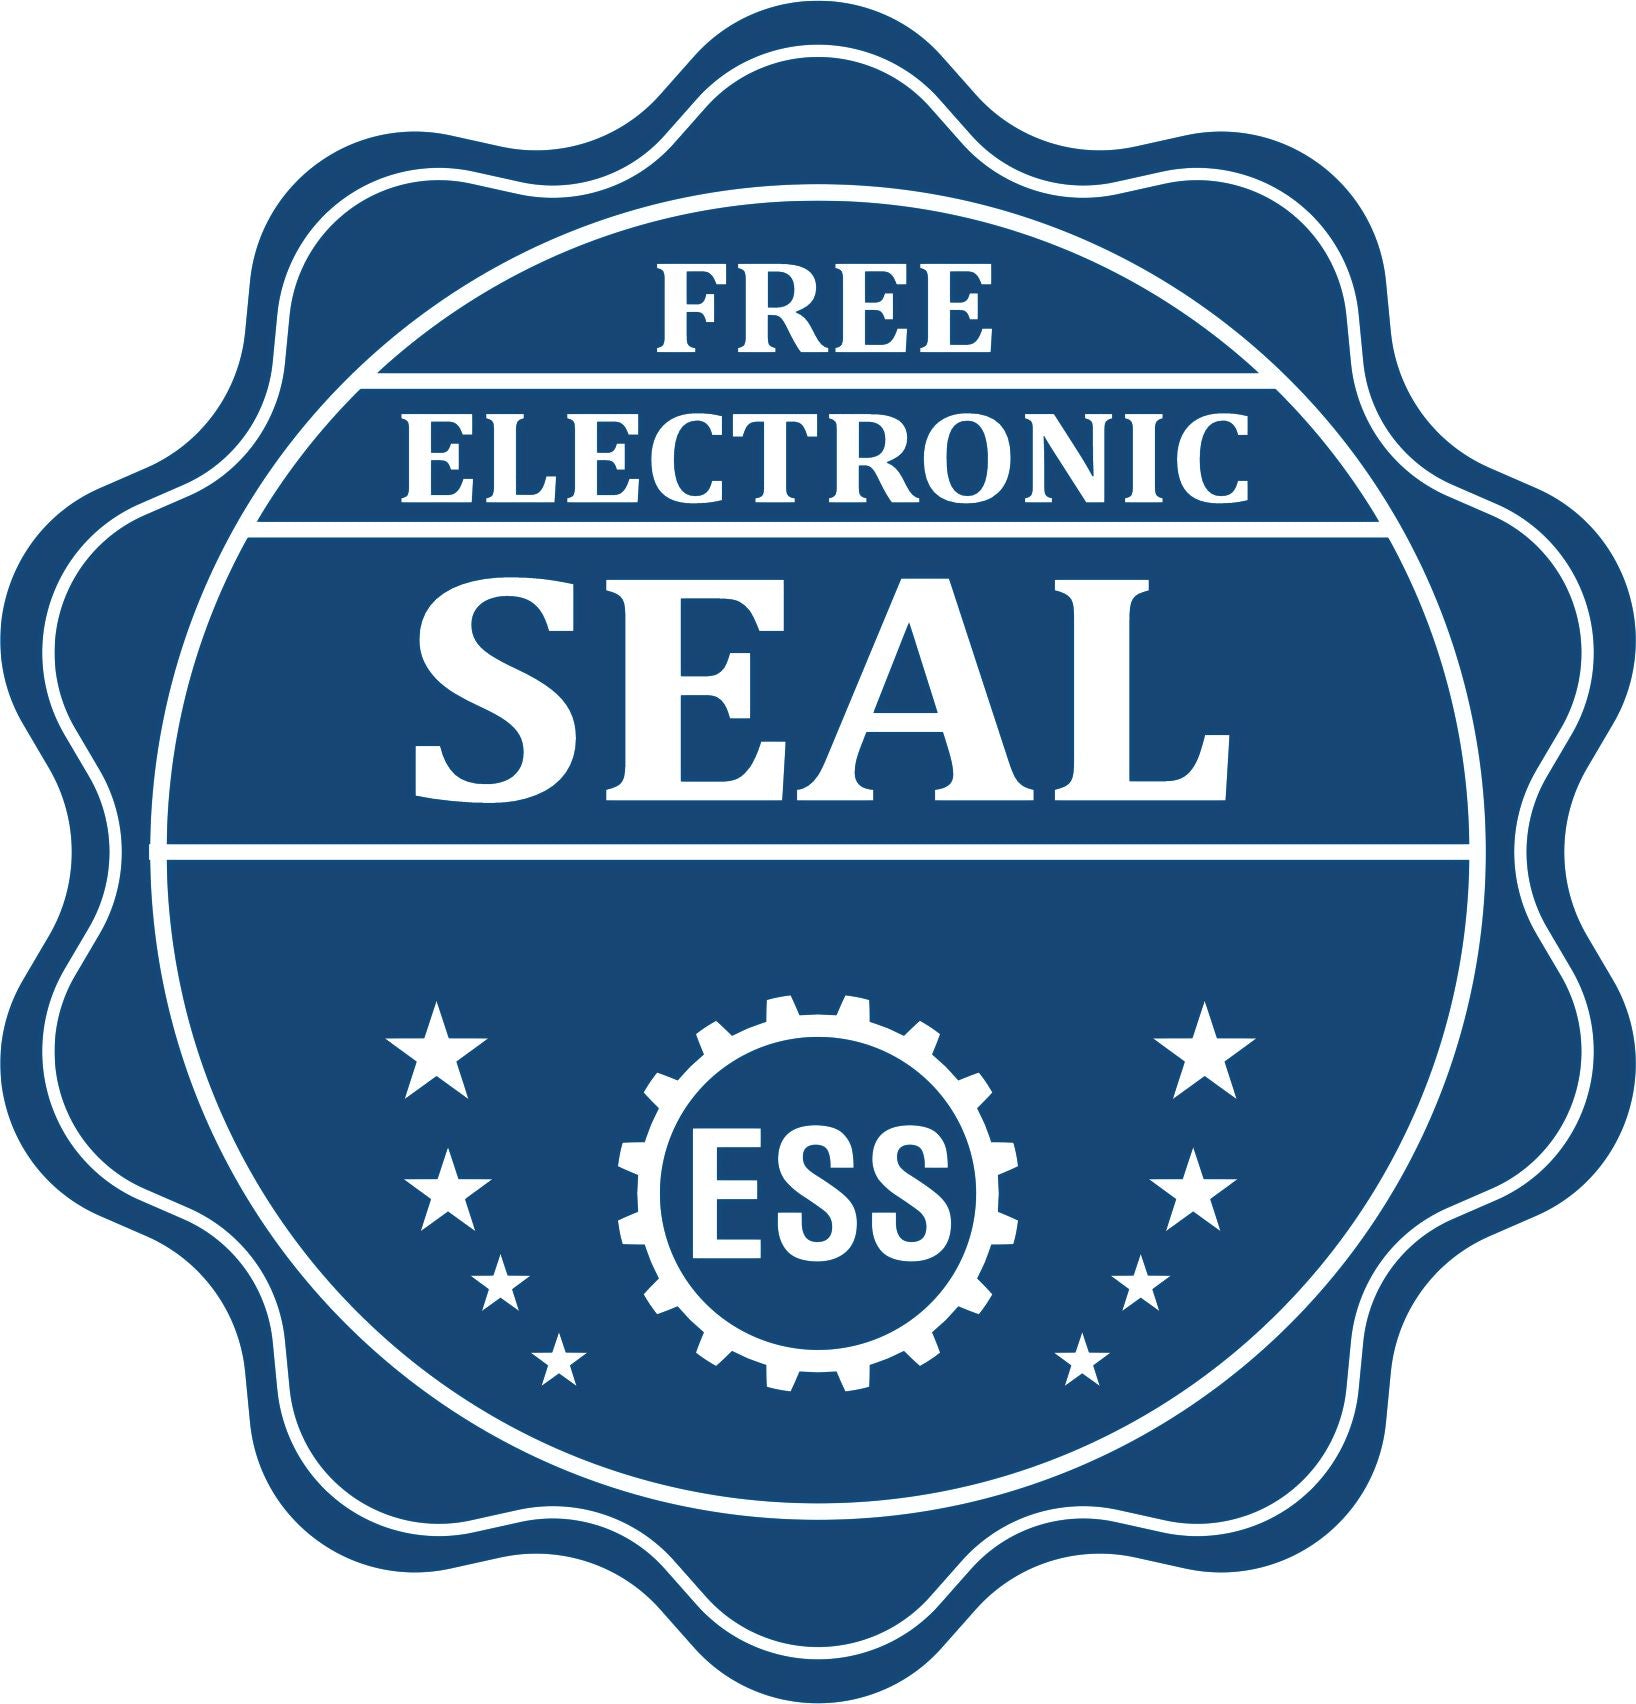 A badge showing a free electronic seal for the Alabama Engineer Desk Seal with stars and the ESS gear on the emblem.